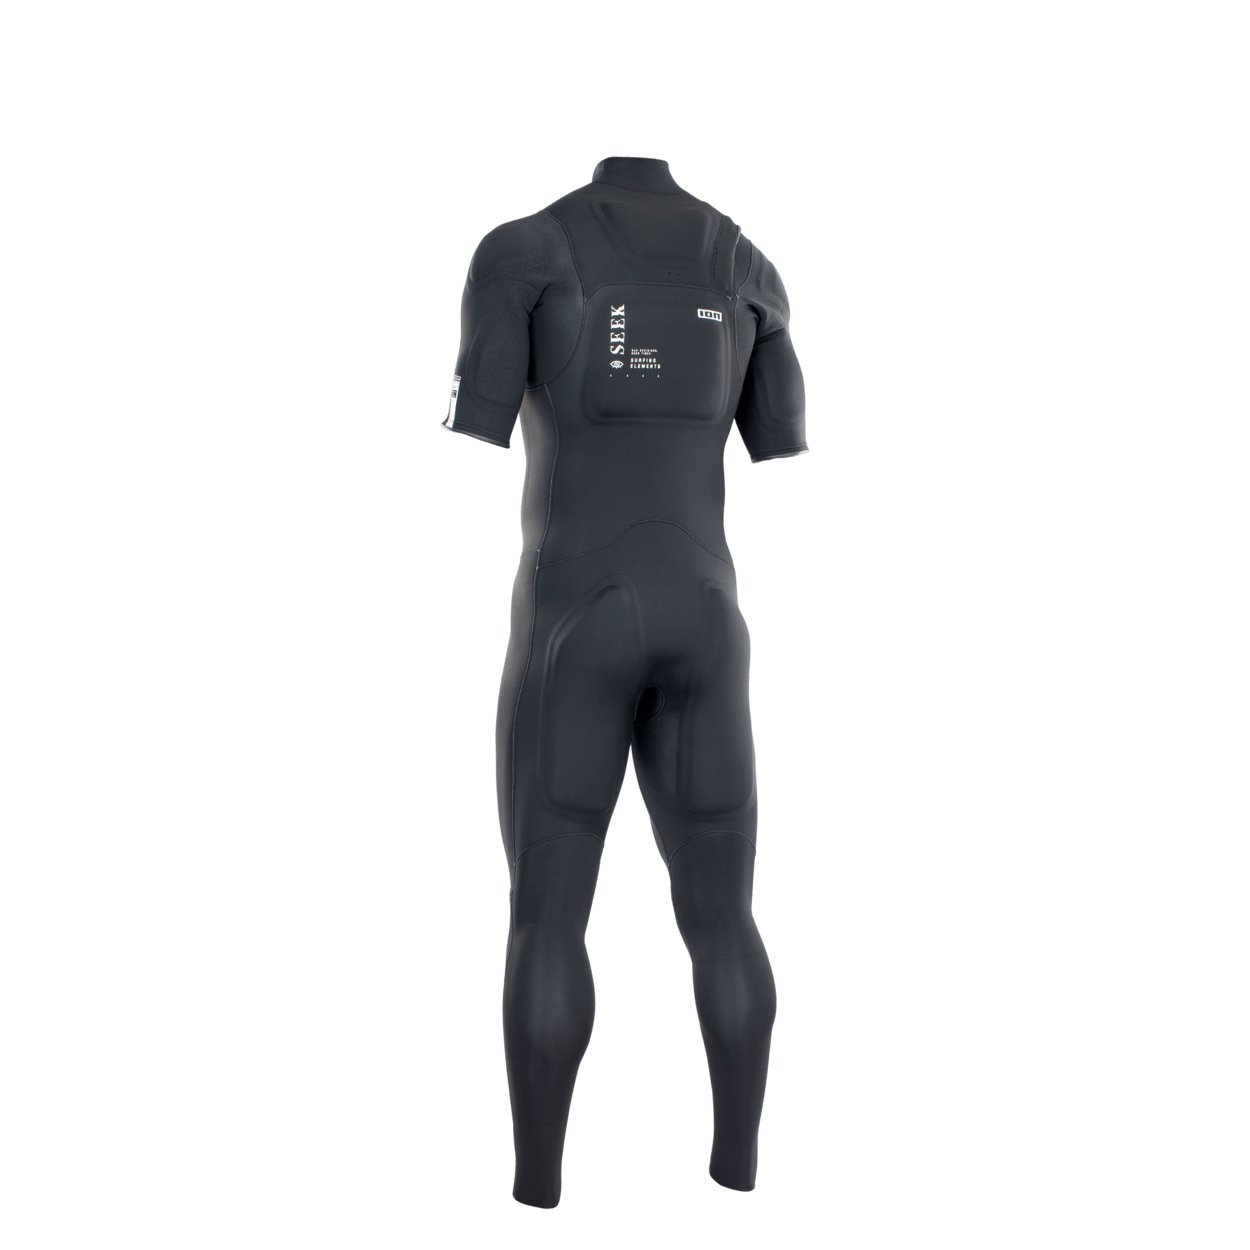 ION Men Wetsuit Protection Suit 3/2 Shortsleeve Front Zip 2021 - Worthing Watersports - 9008415953288 - Wetsuits - ION Water